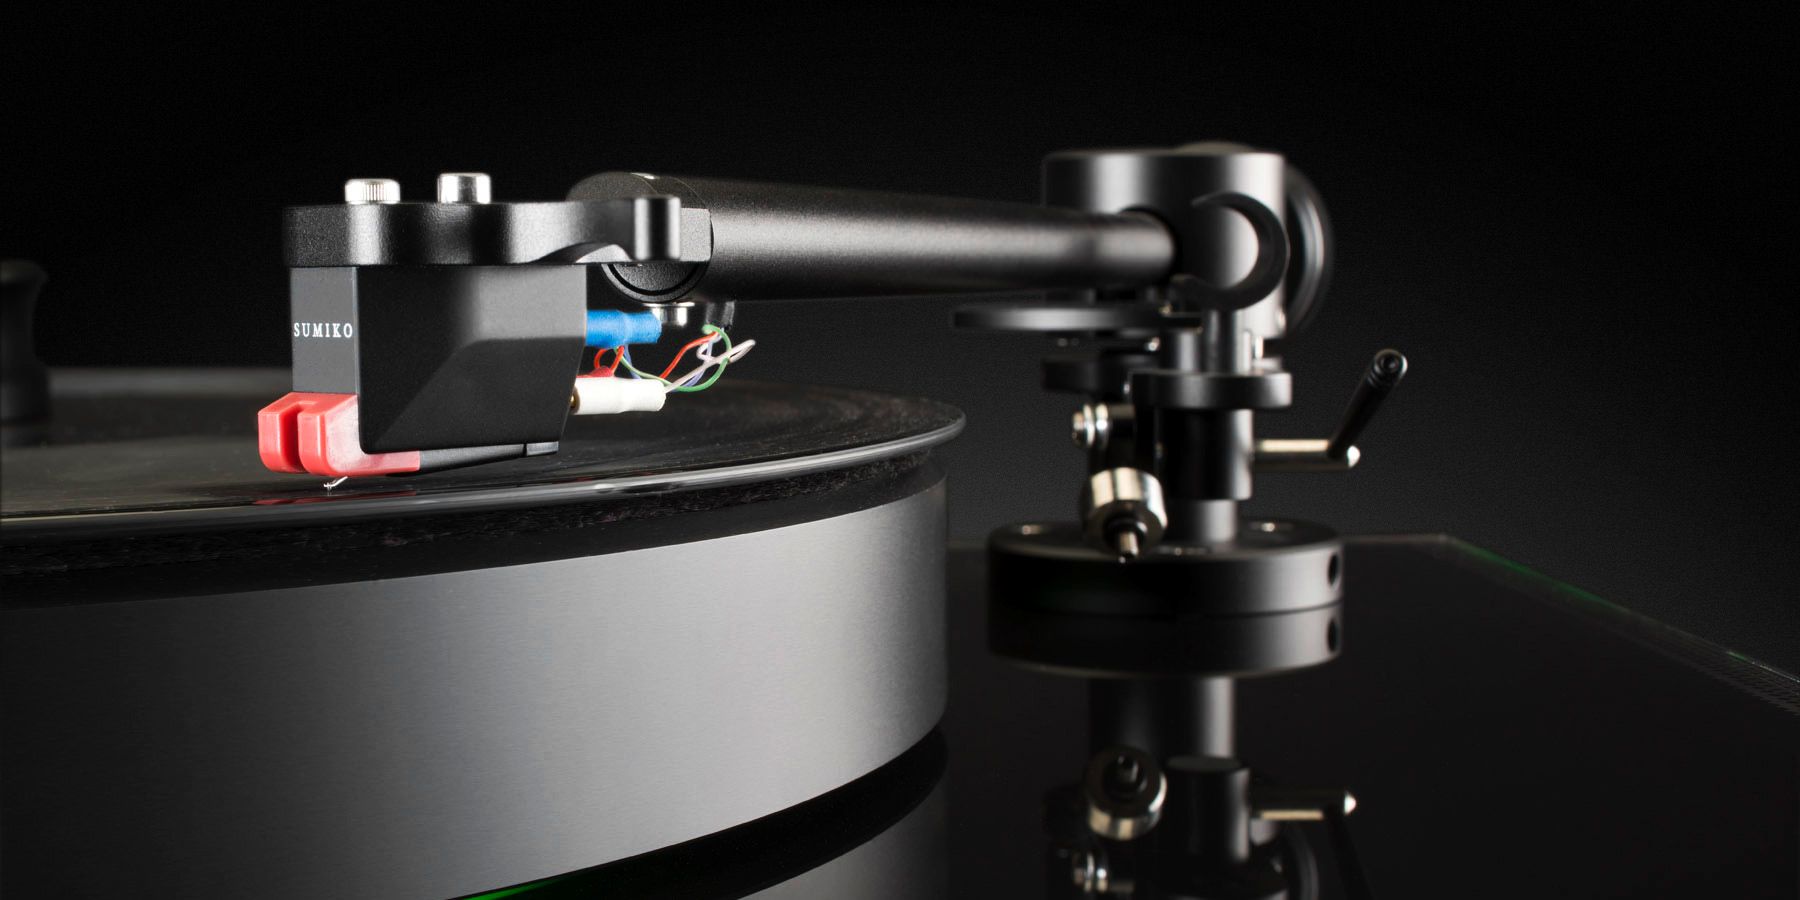 McIntosh MT2 now ships with the Sumiko Moonstone moving magnet phono cartridge installed